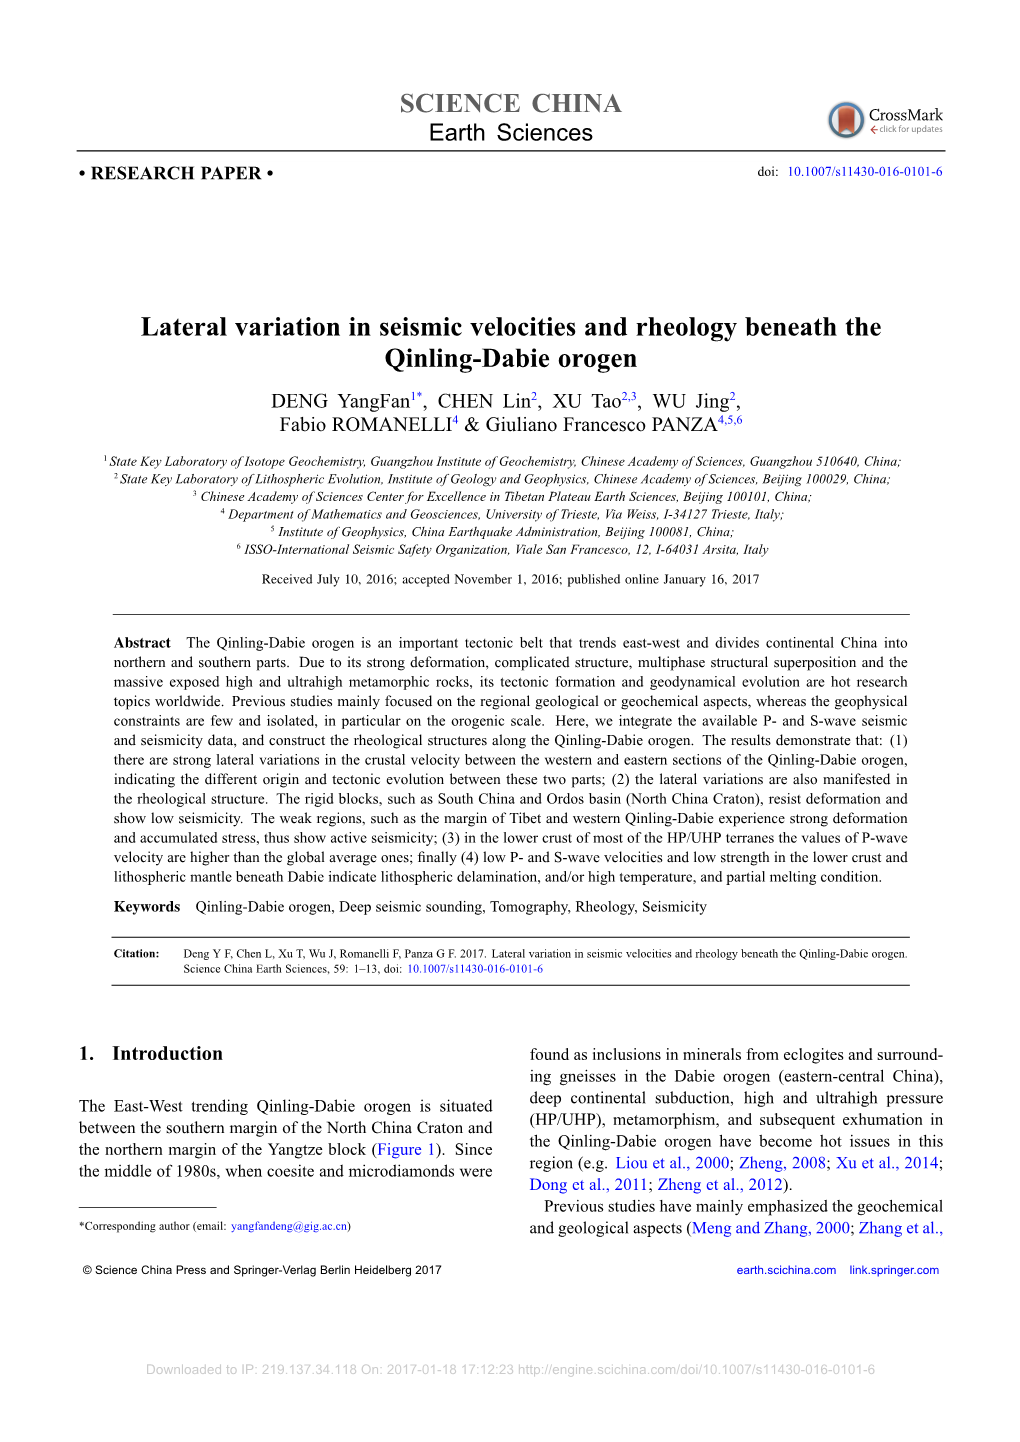 SCIENCE CHINA Lateral Variation in Seismic Velocities and Rheology